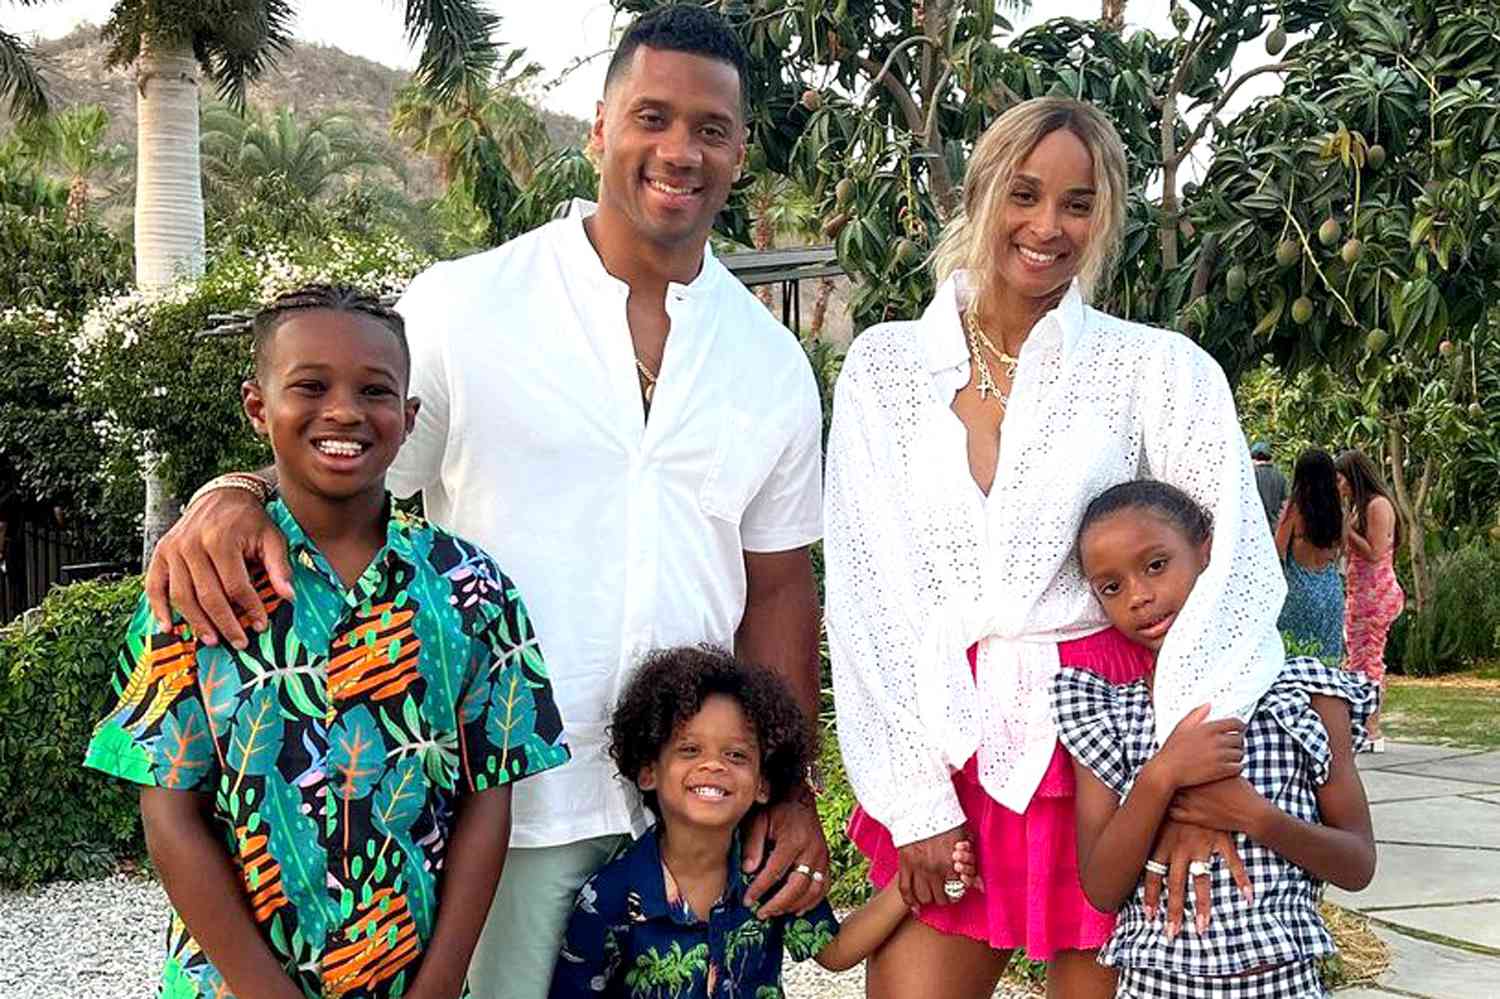 Ciara and Russell Wilson Share Family Photo After Baby No. 4 News: 'The Wilson 5 (+1)'